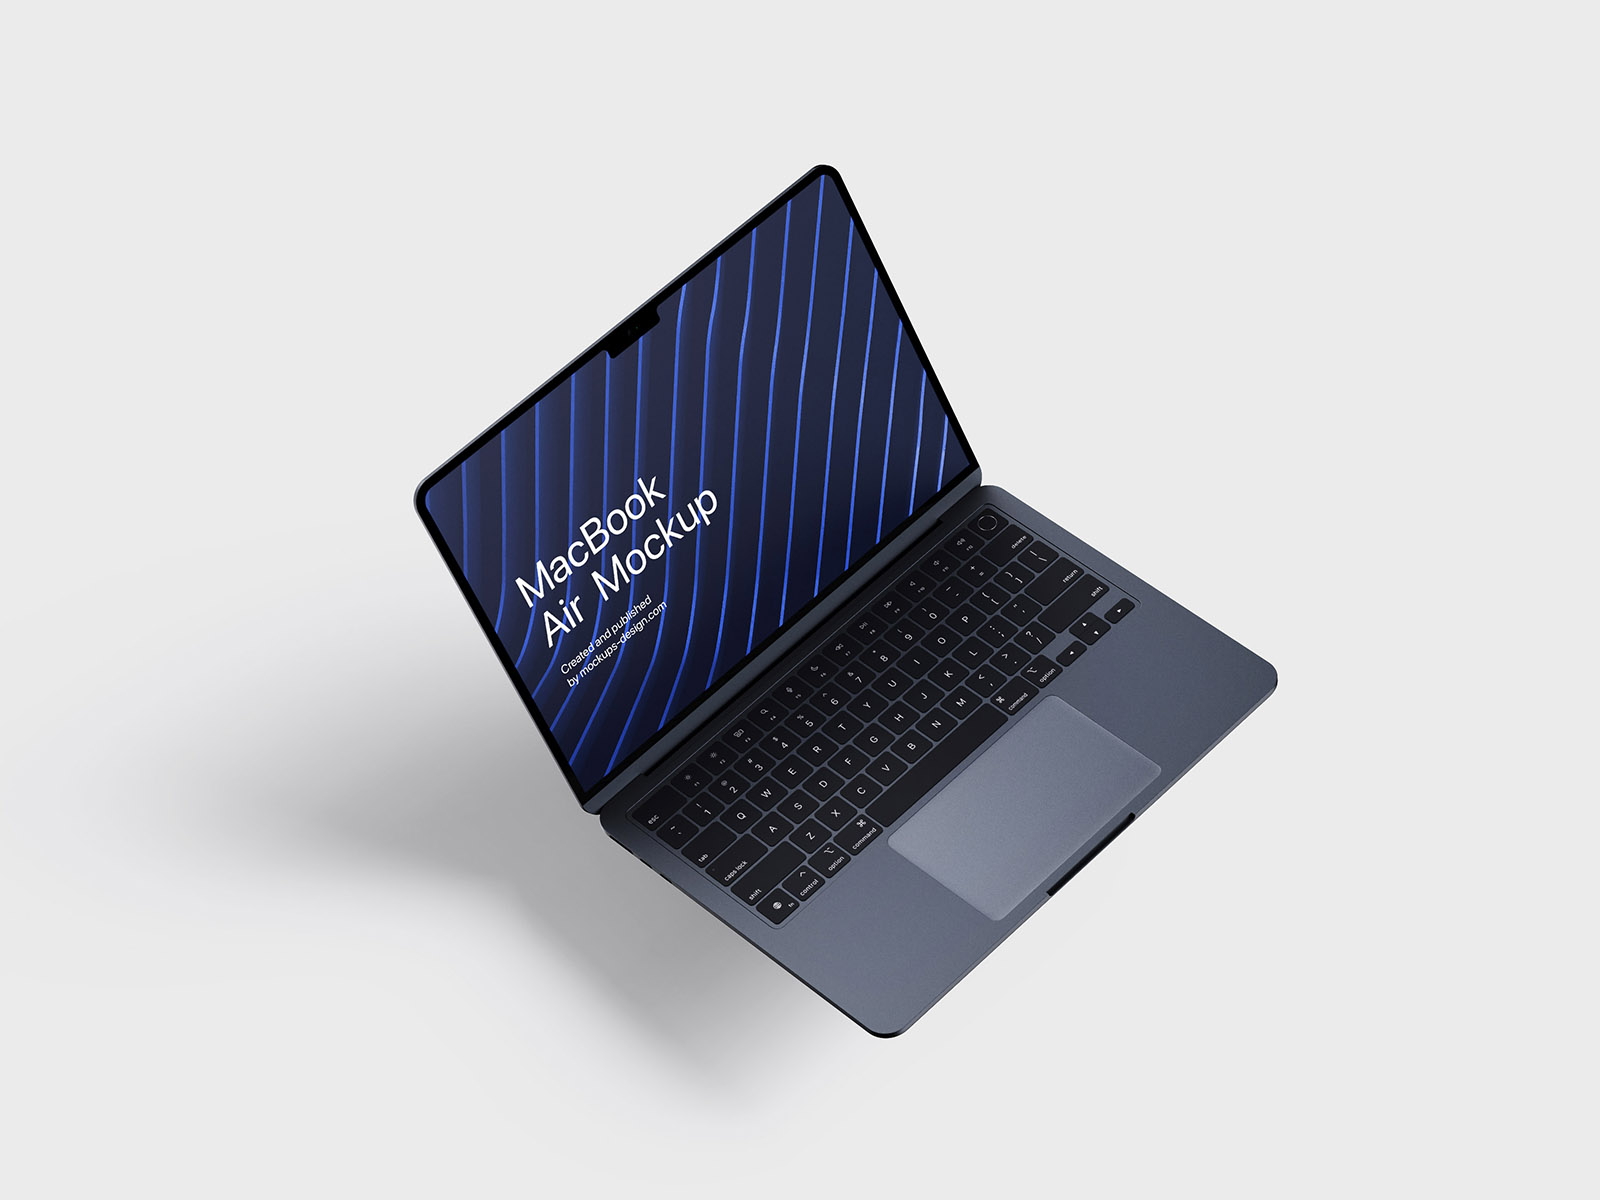 5 Mockups of Open MacBook Air from Different Angles FREE PSD